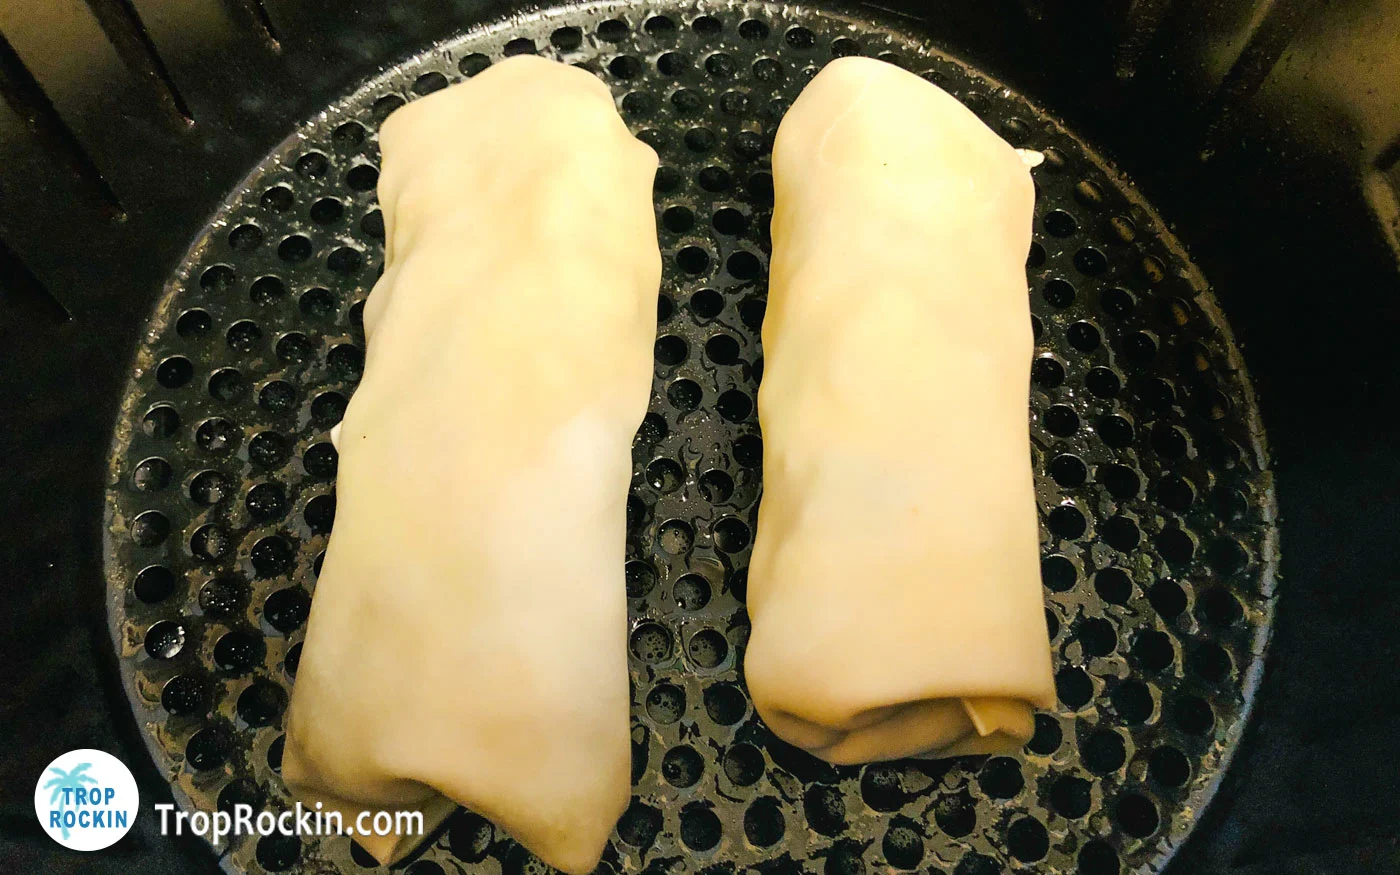 Two avocado egg rolls placed inside the air fryer basket.